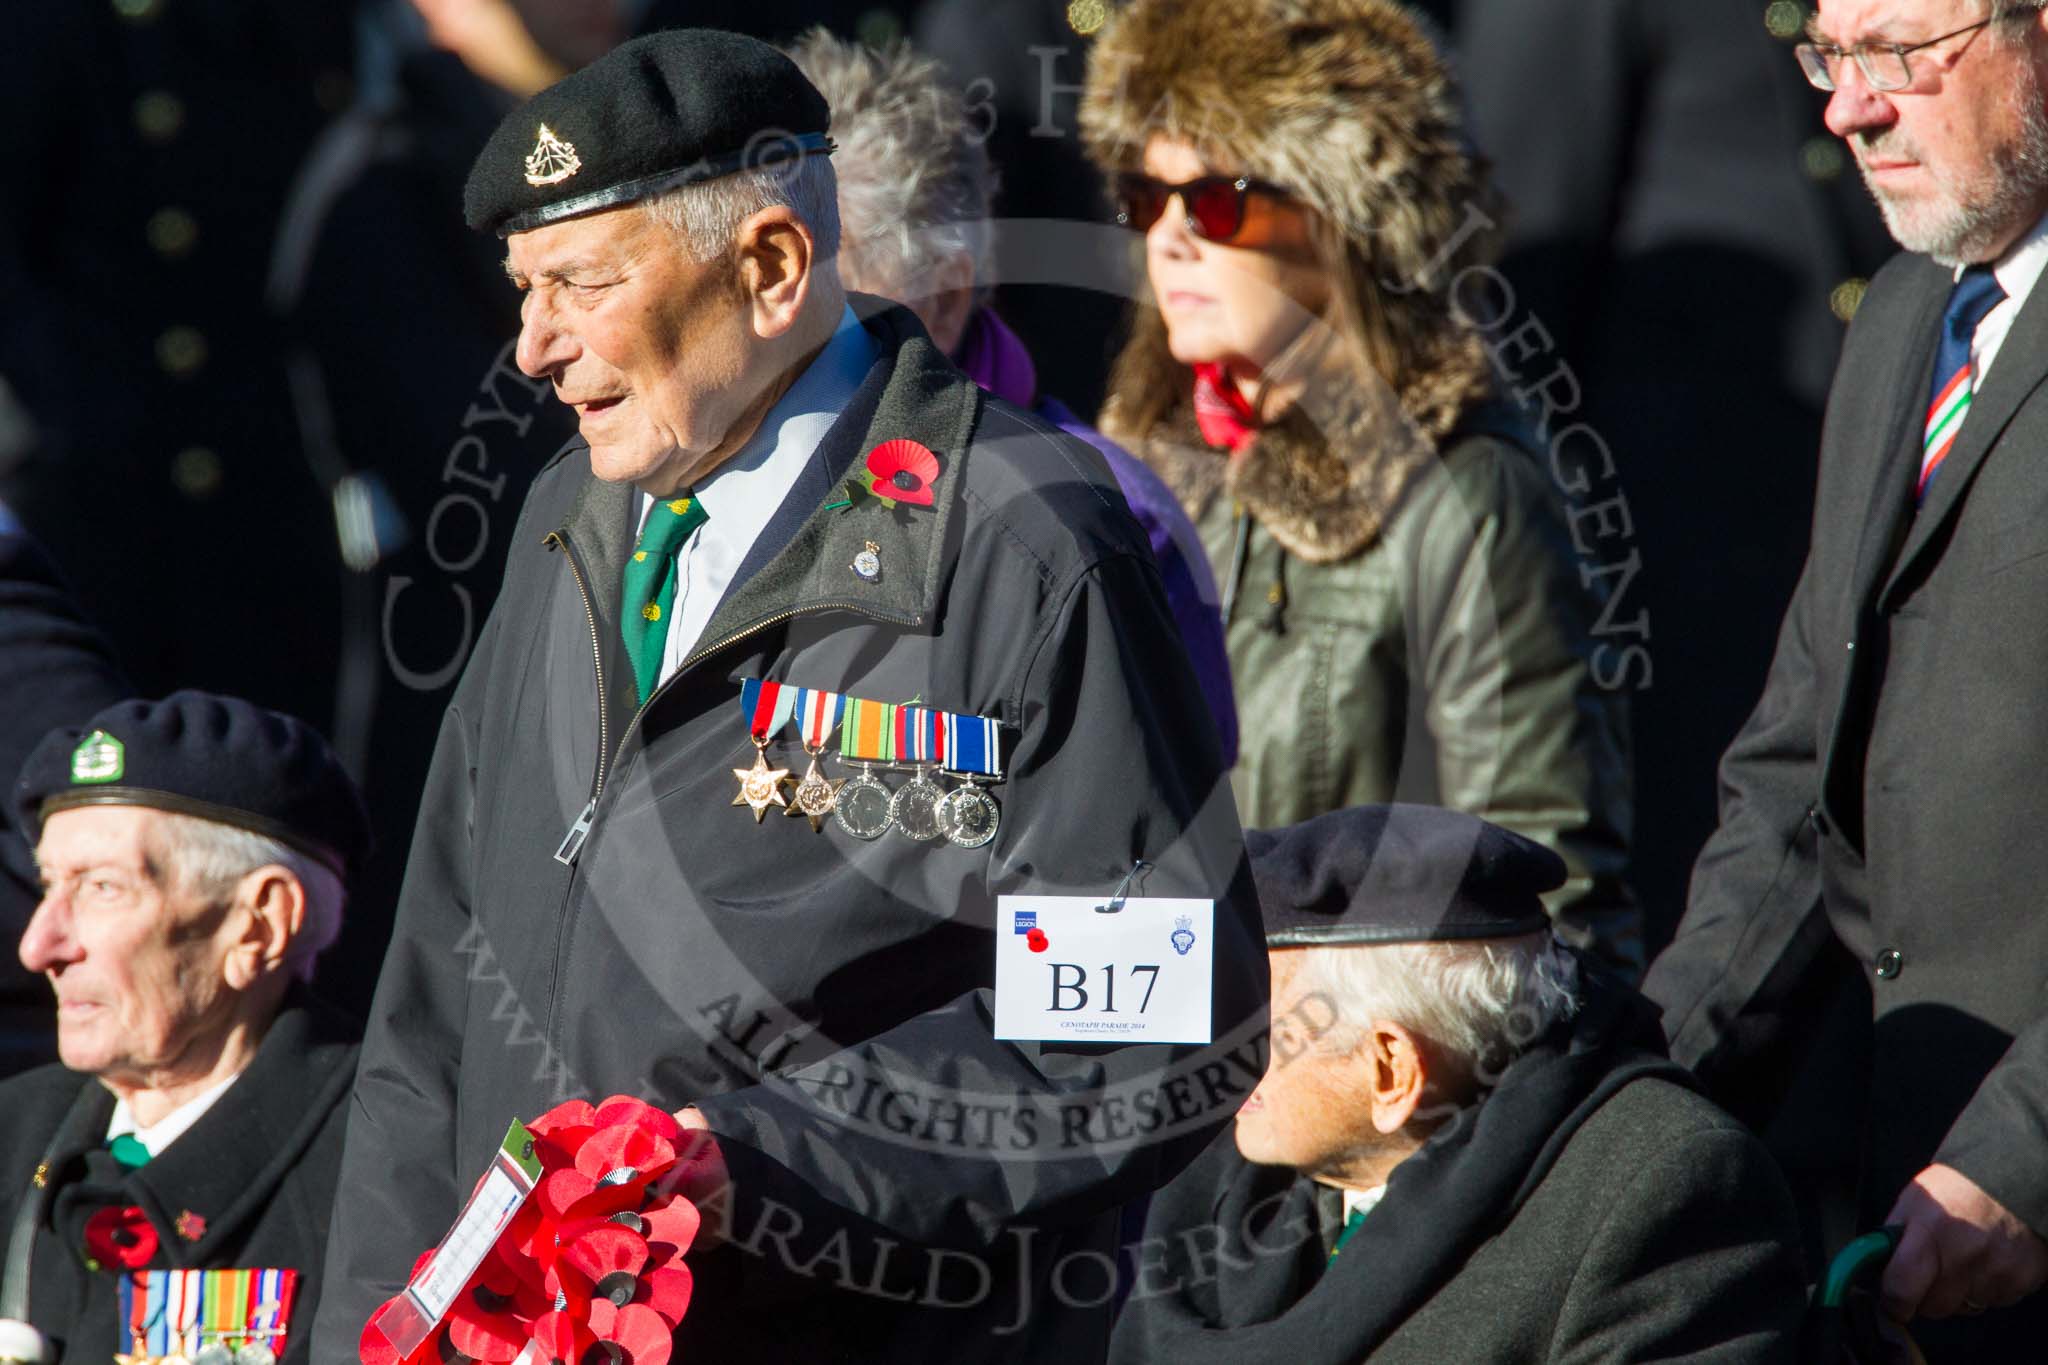 Remembrance Sunday at the Cenotaph in London 2014: Group B17 - Reconnaissance Corps.
Press stand opposite the Foreign Office building, Whitehall, London SW1,
London,
Greater London,
United Kingdom,
on 09 November 2014 at 12:10, image #1699